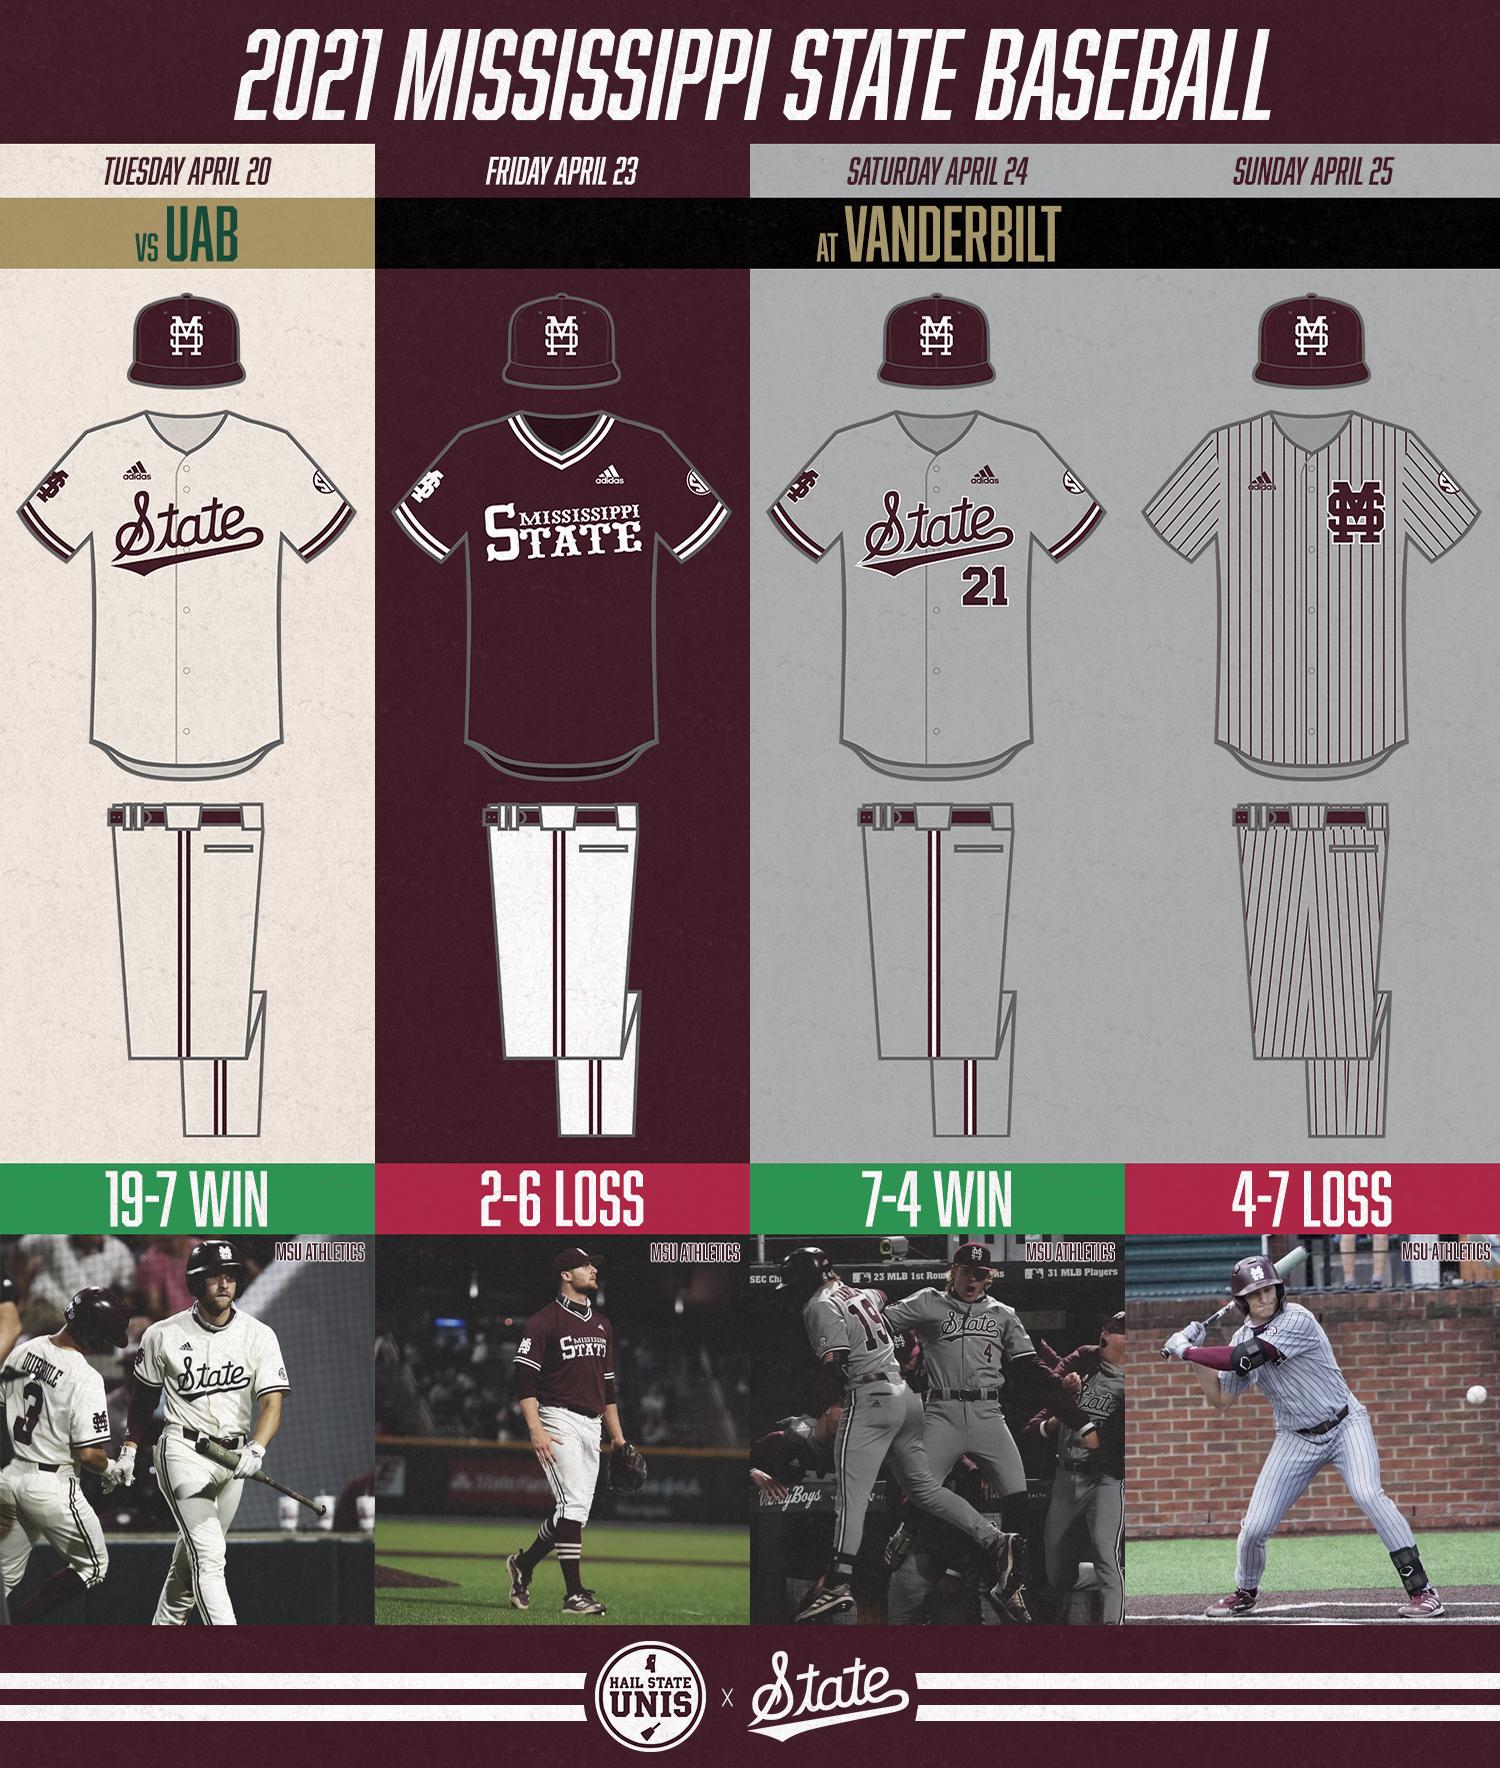 2021 baseball jerseys are dope. That is all. : r/aggies